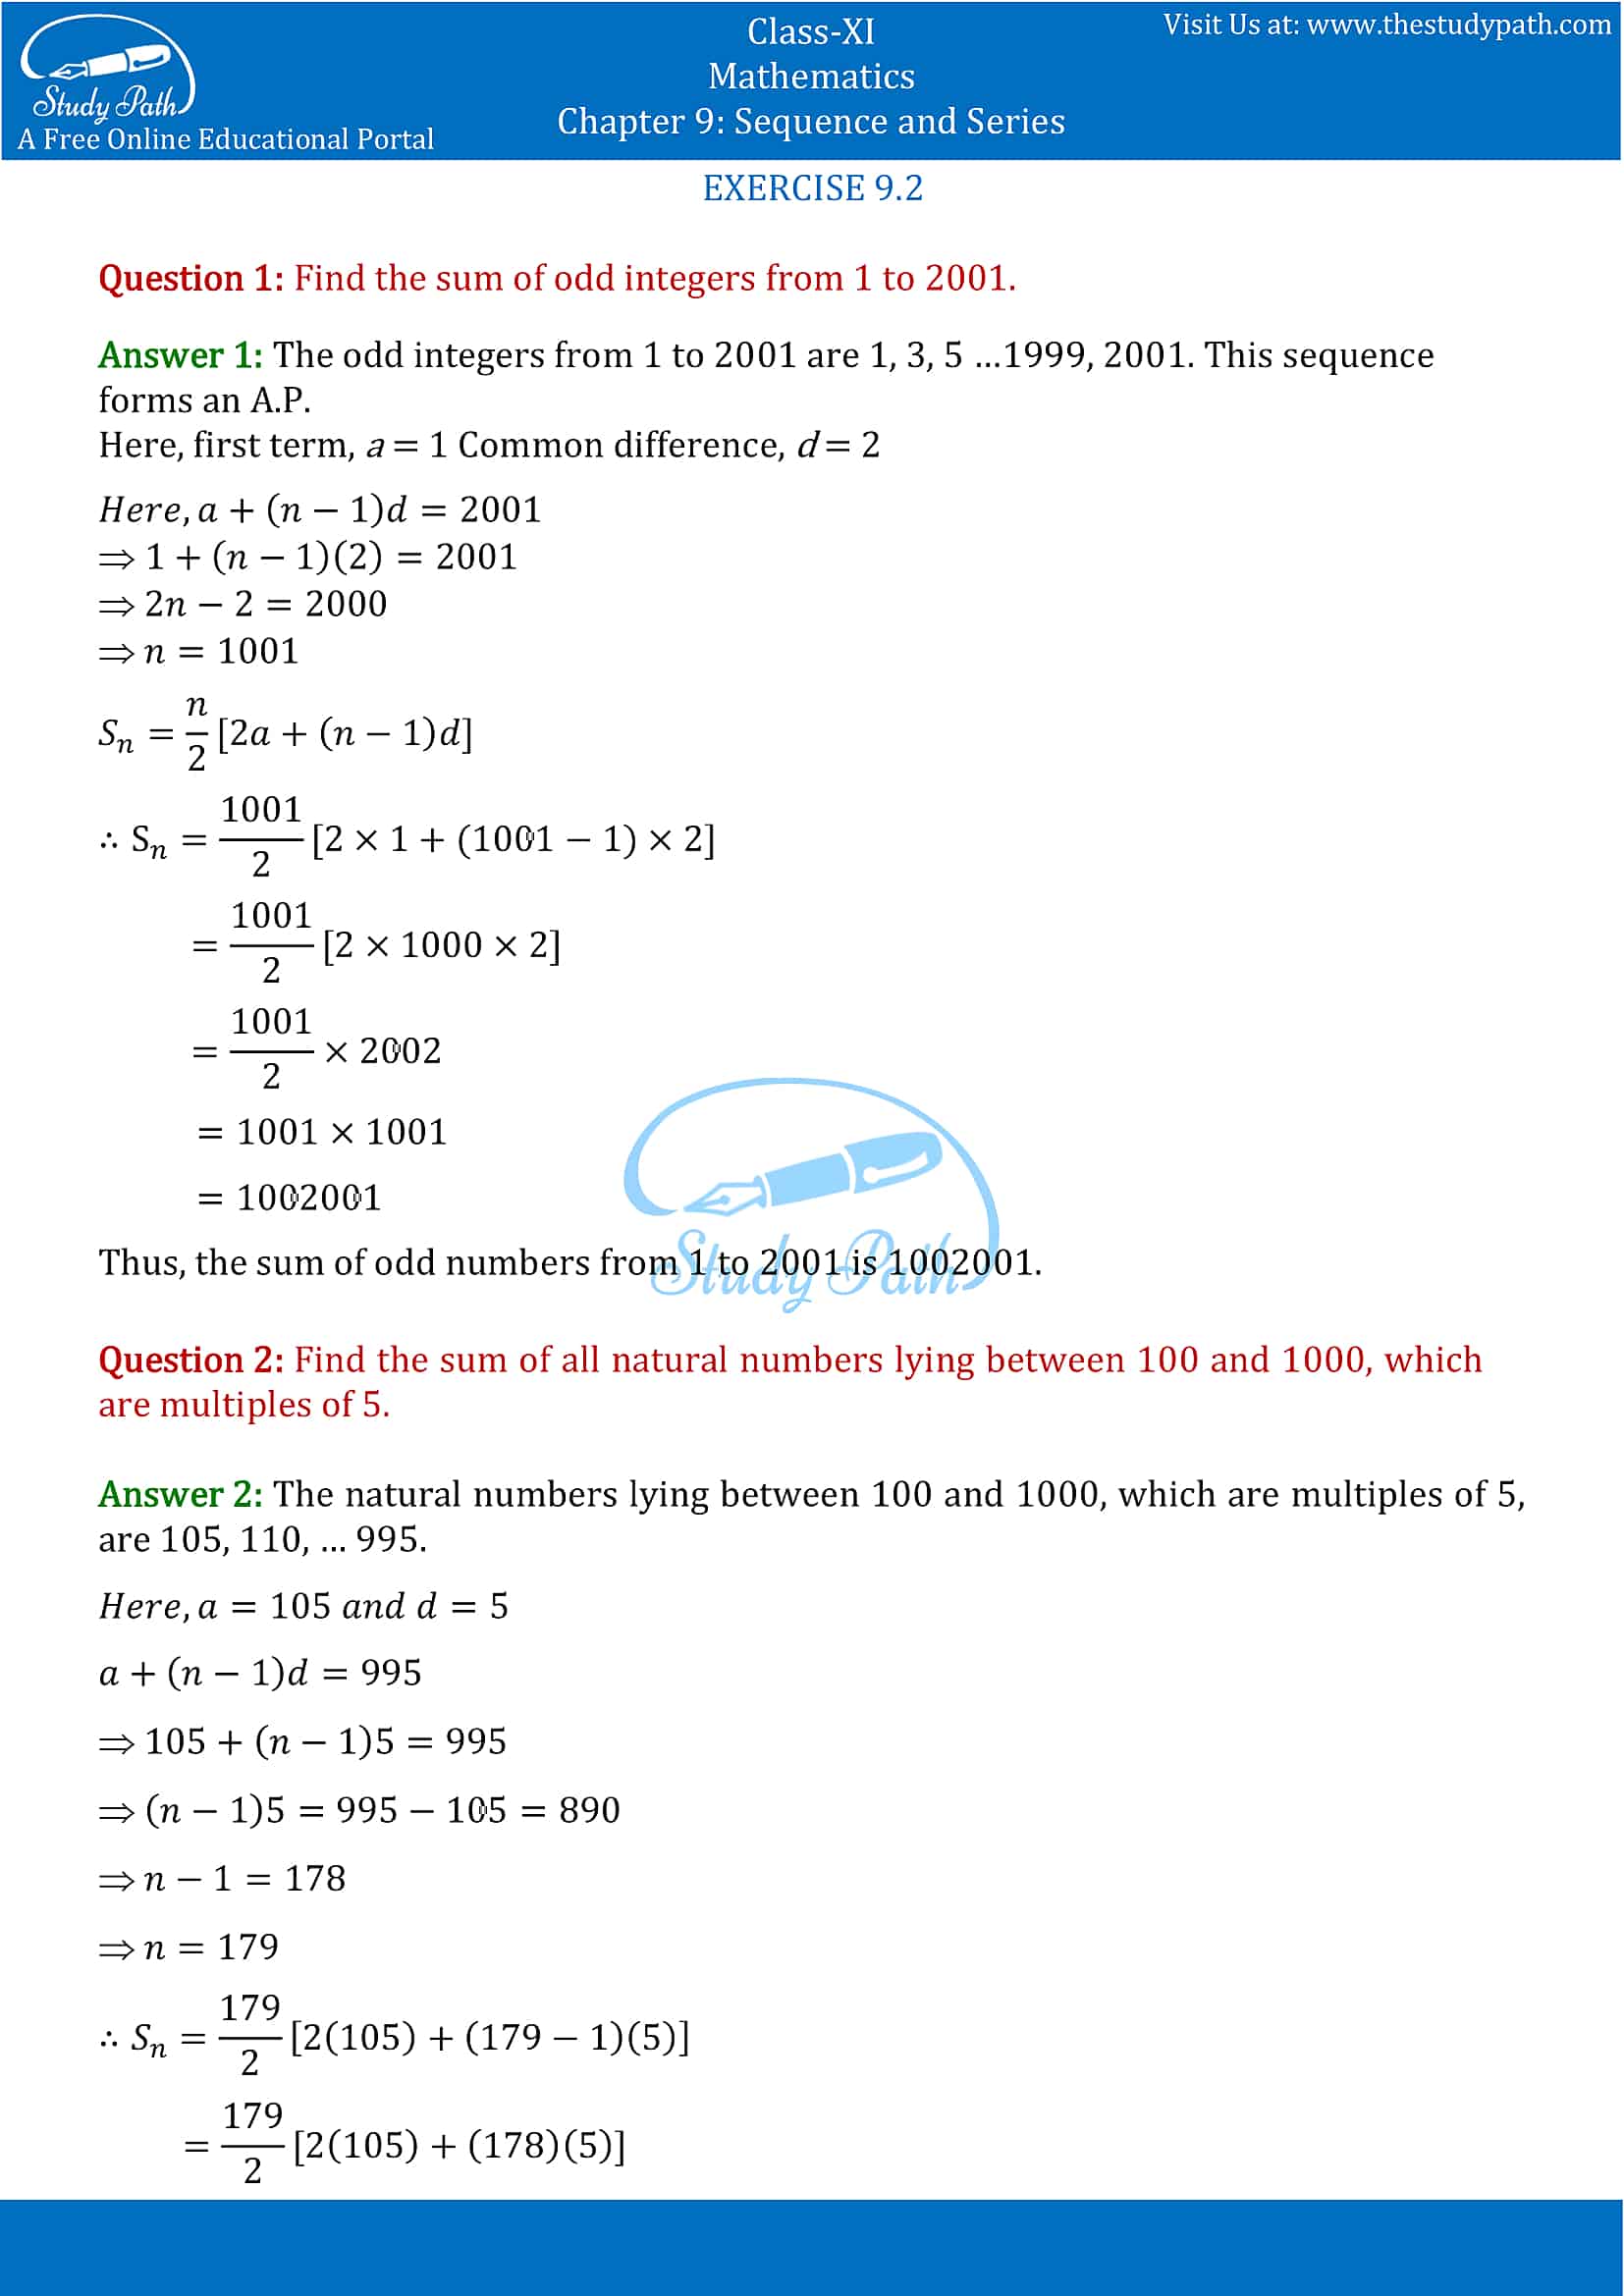 NCERT Solutions for Class 11 Maths chapter 9 Sequence and Series Exercise 9.2 Part-1